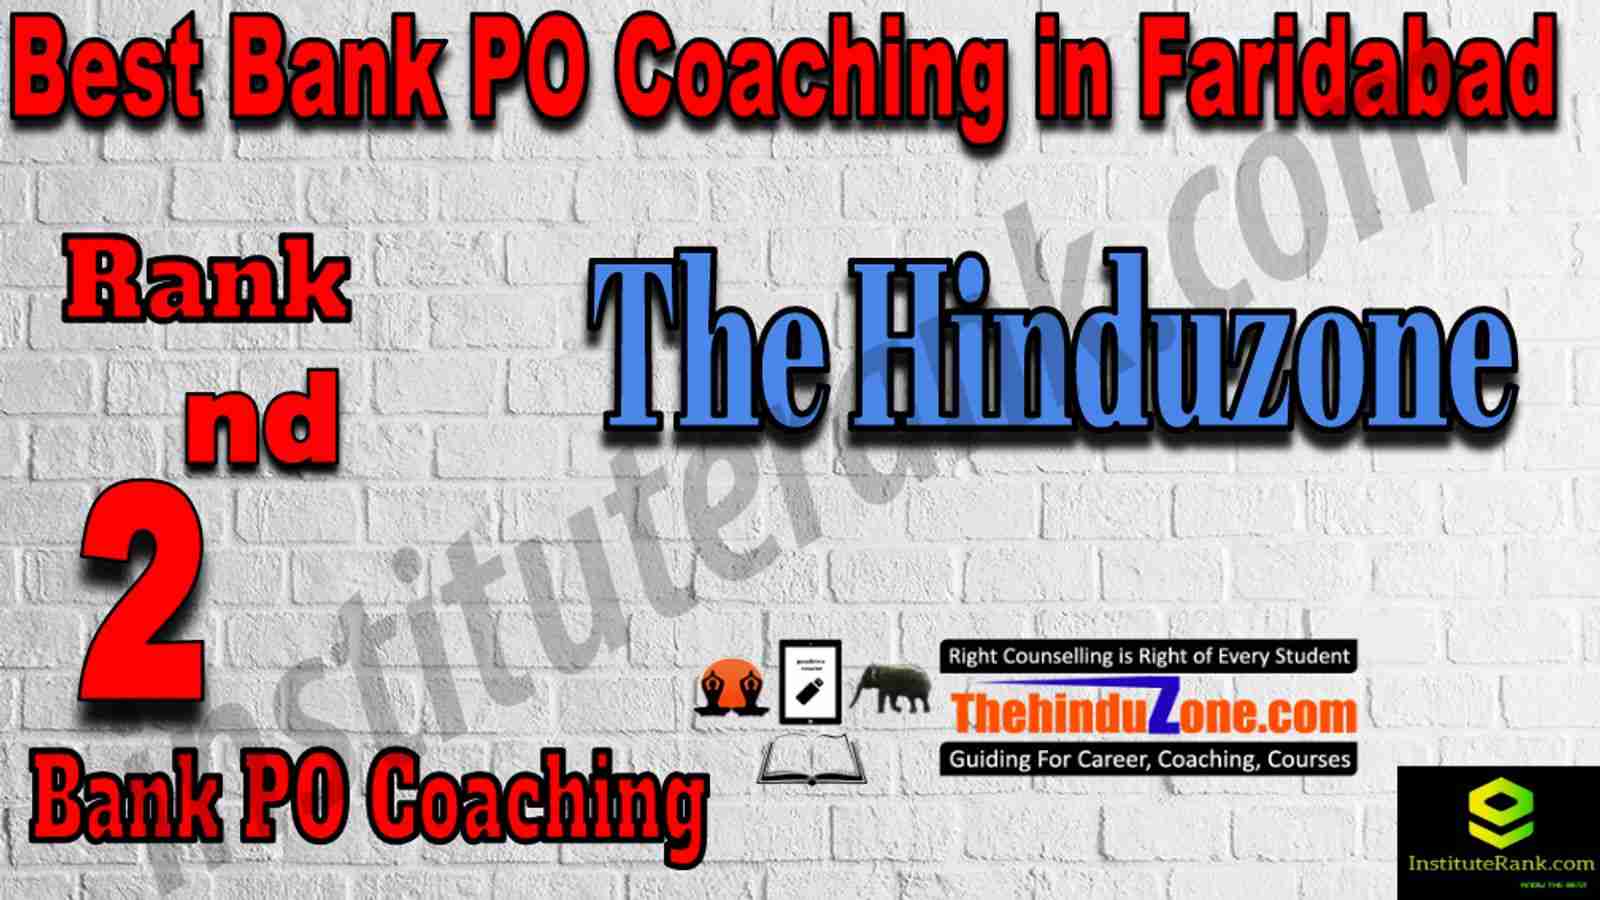 2nd Best Bank PO Coaching in Faridabad